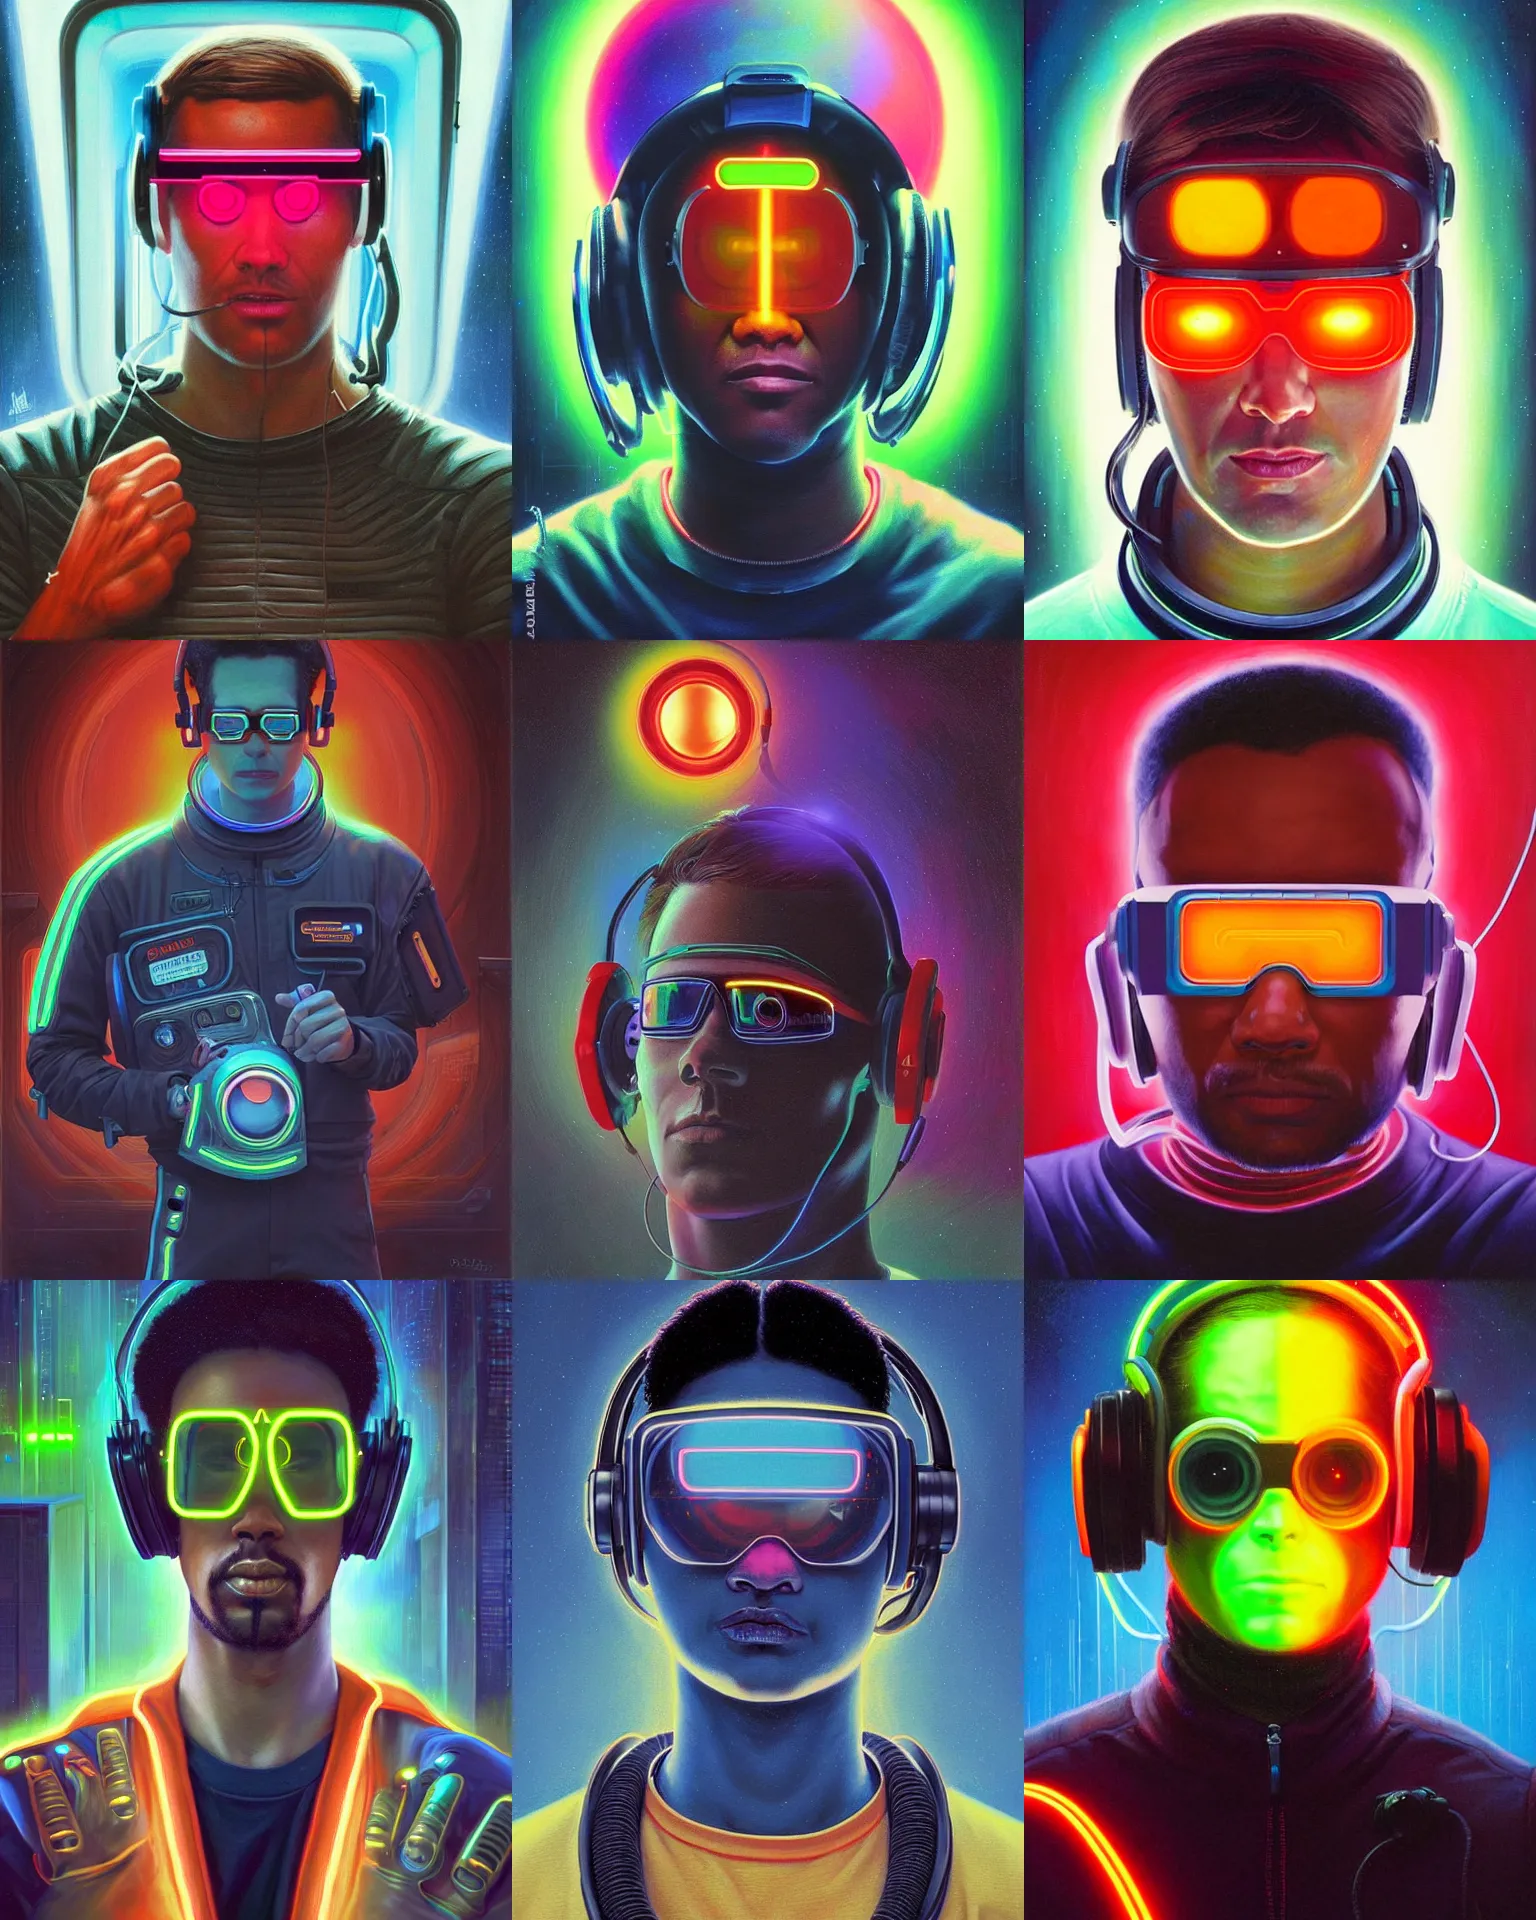 Prompt: neon cyberpunk programmer with glowing geordi cyclops visor over eyes and sleek headphones headshot desaturated portrait painting by donato giancola, dean cornwall, rhads, tom whalen, alex grey astronaut fashion photography